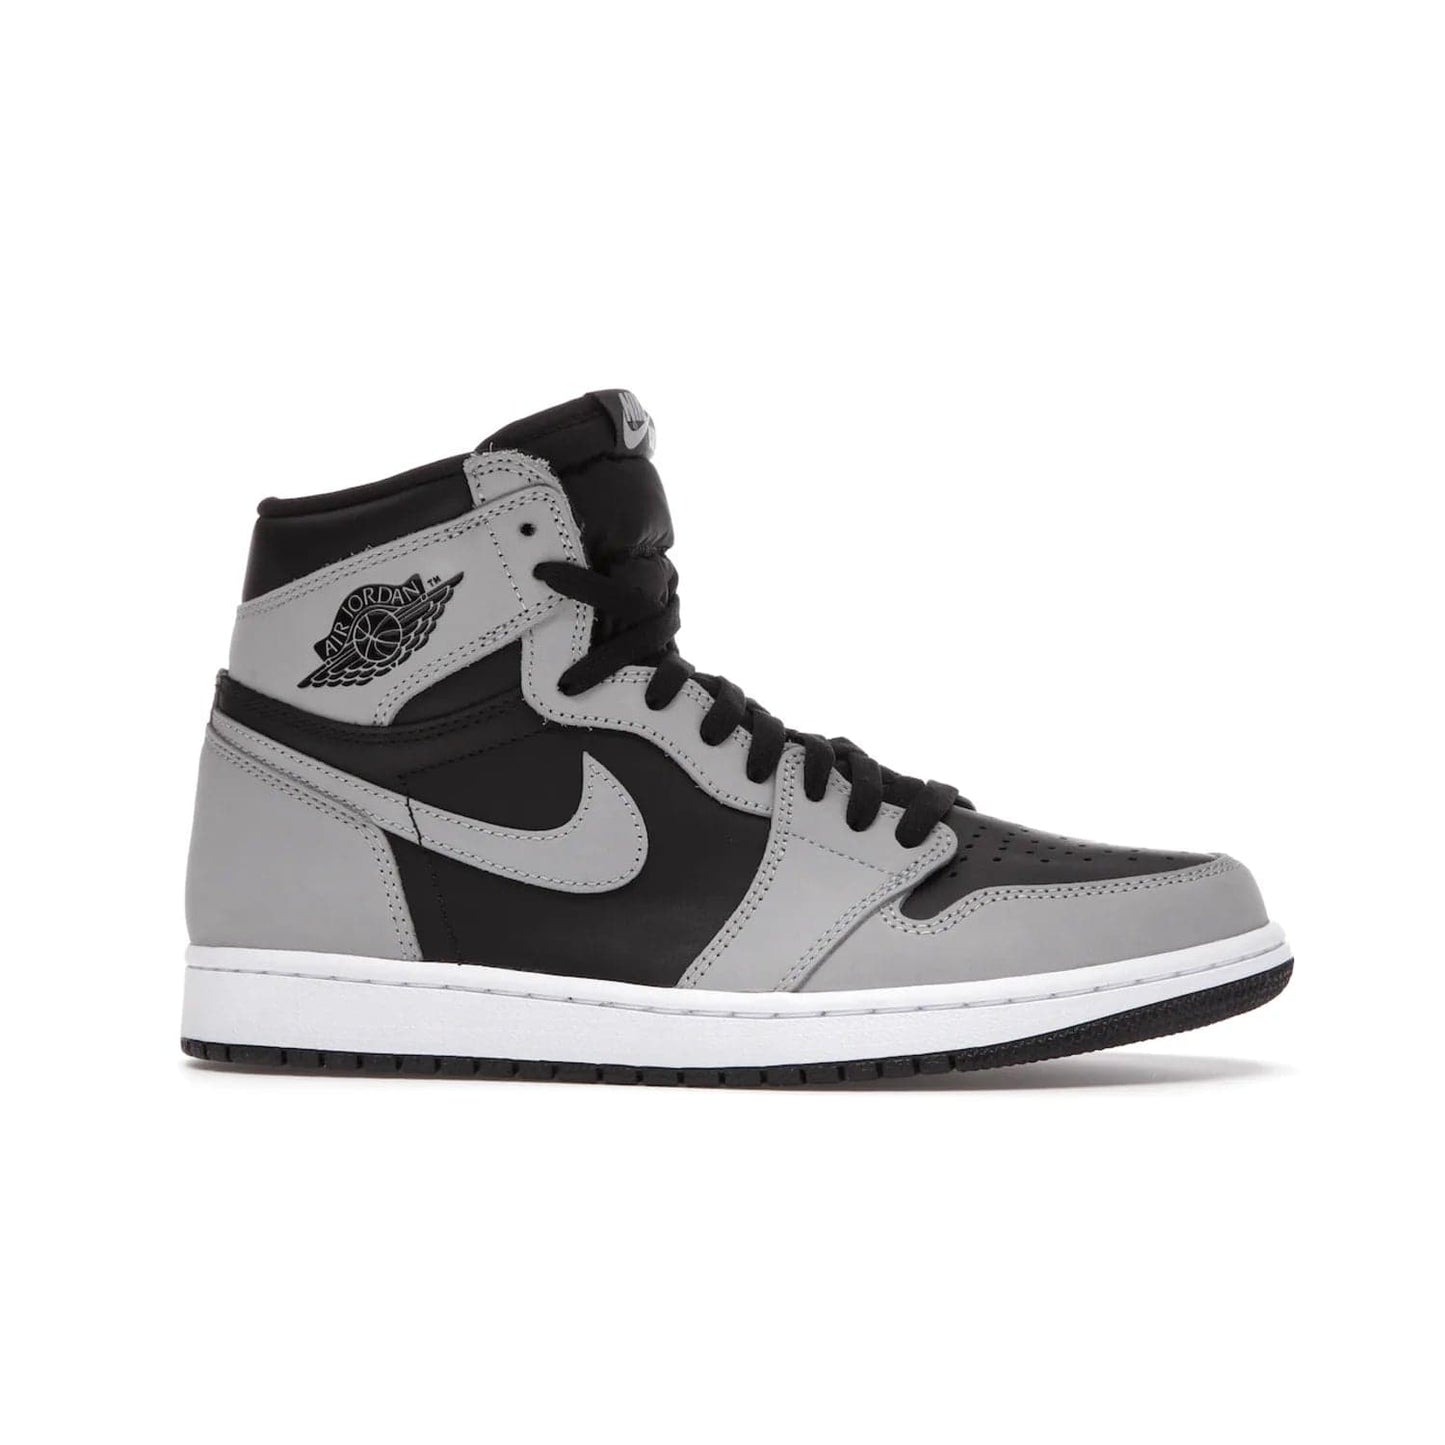 Jordan 1 Retro High Shadow 2.0 - Image 2 - Only at www.BallersClubKickz.com - #
Classic Air Jordan 1 Retro High Shadow 2.0 with black leather base and Light Smoke Grey overlays. Released in May 2021.